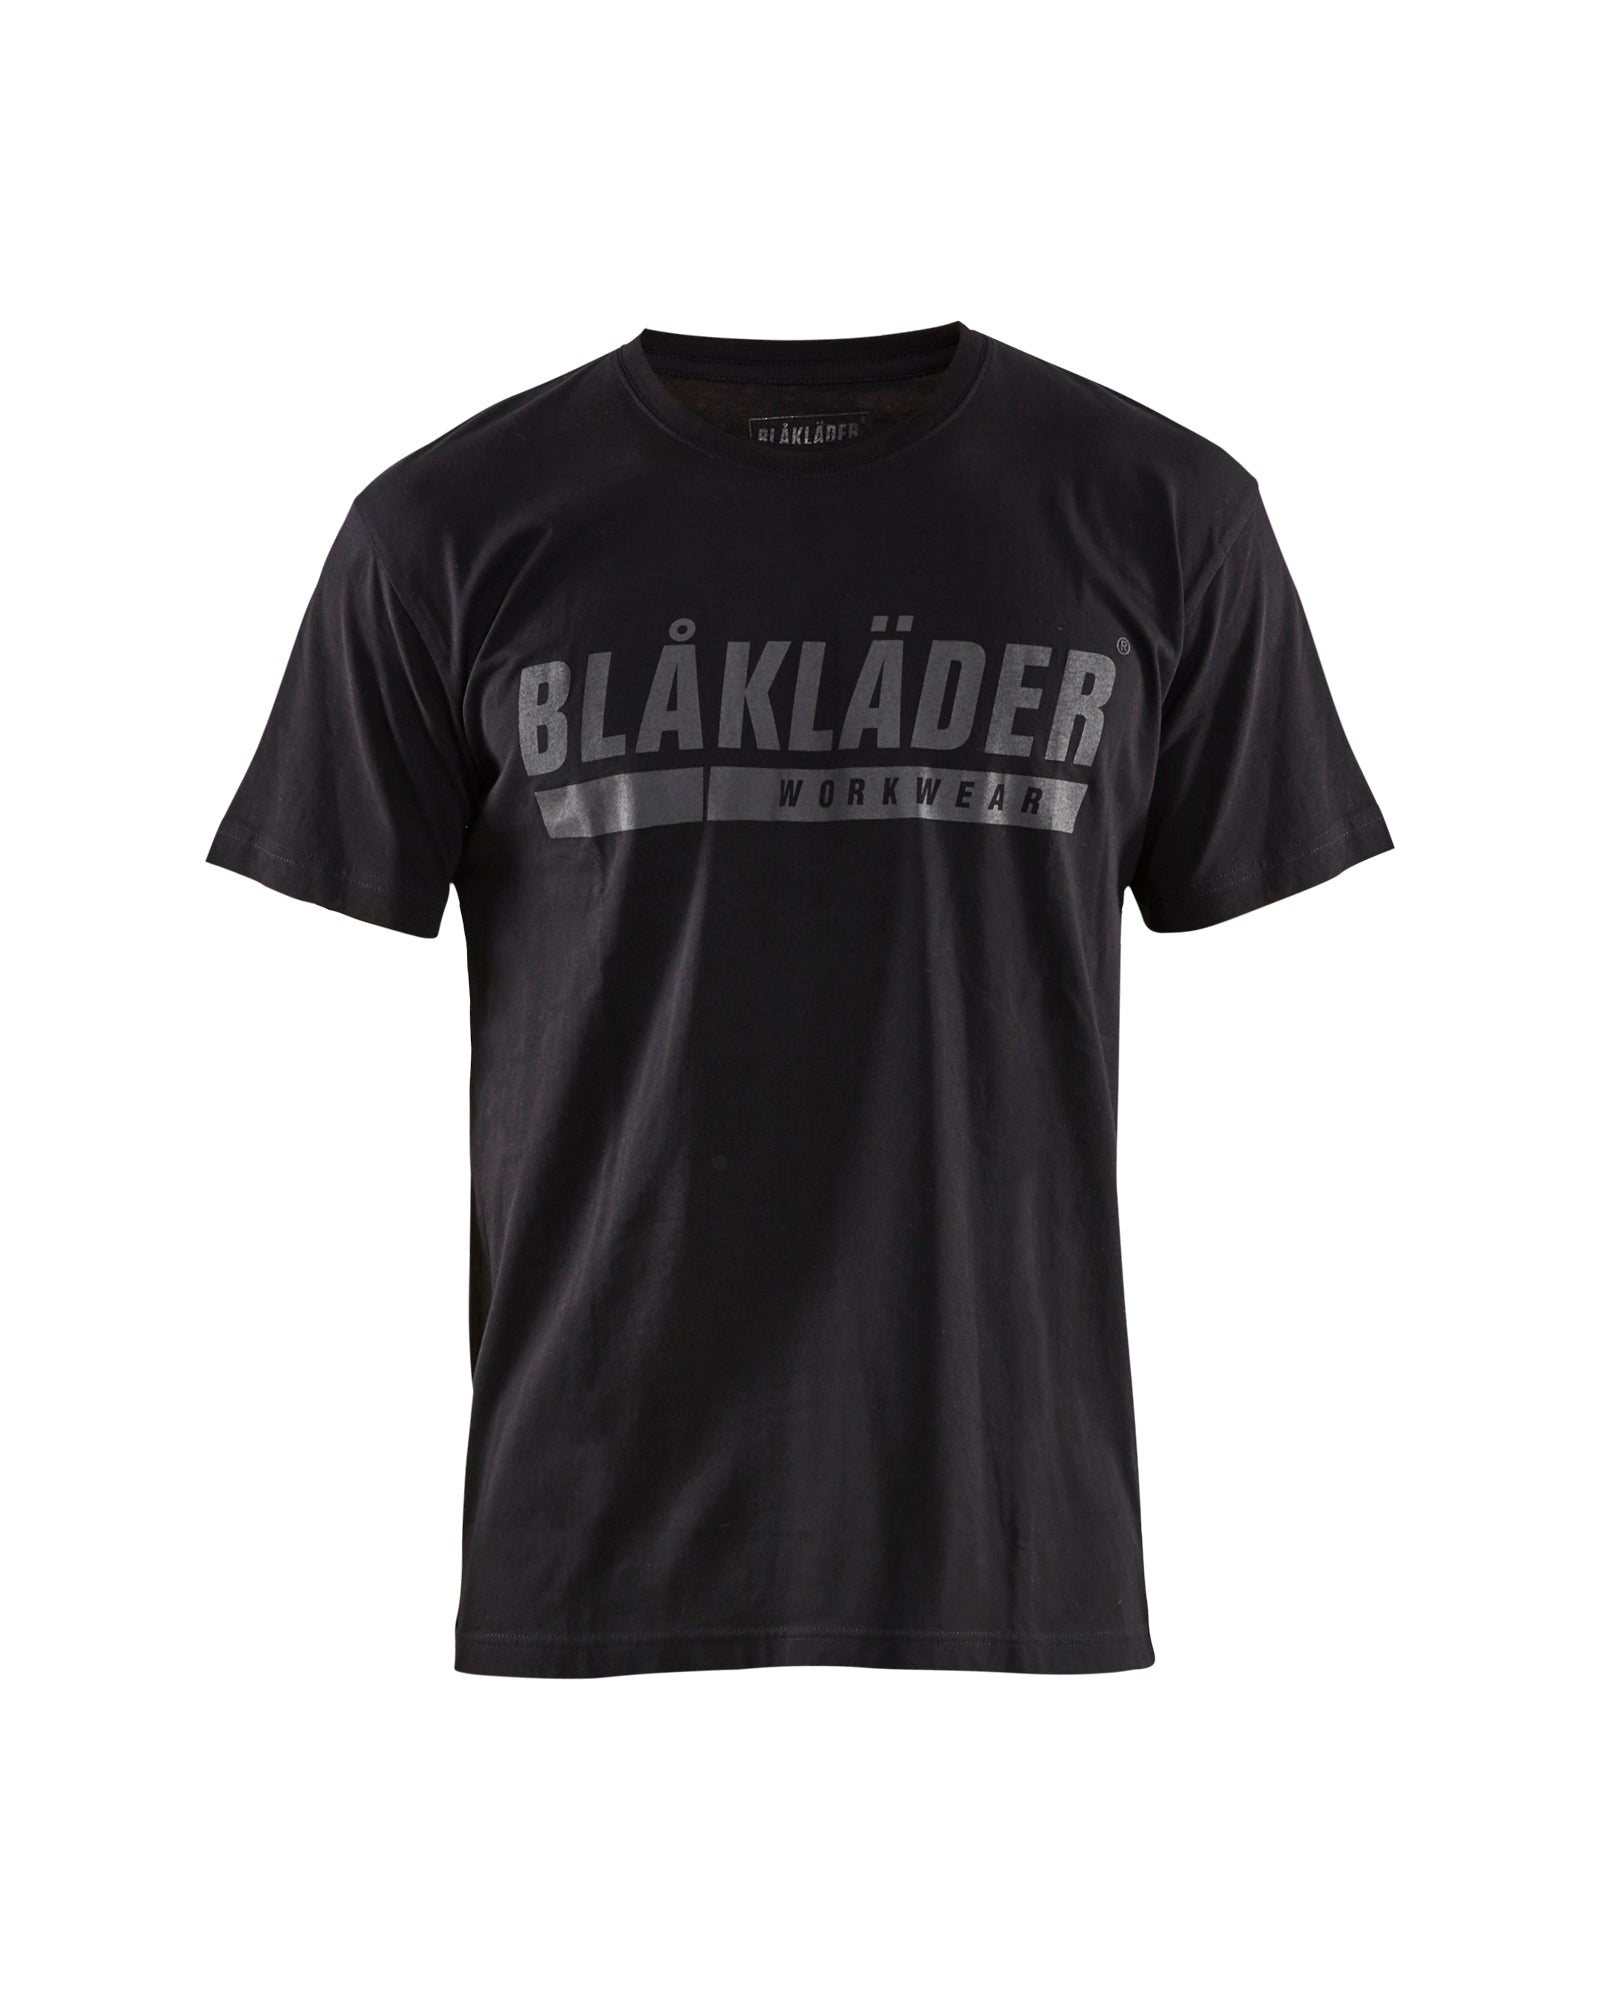 Men's Blaklader US Short Sleeves with Logo T-Shirt in Black from the front view